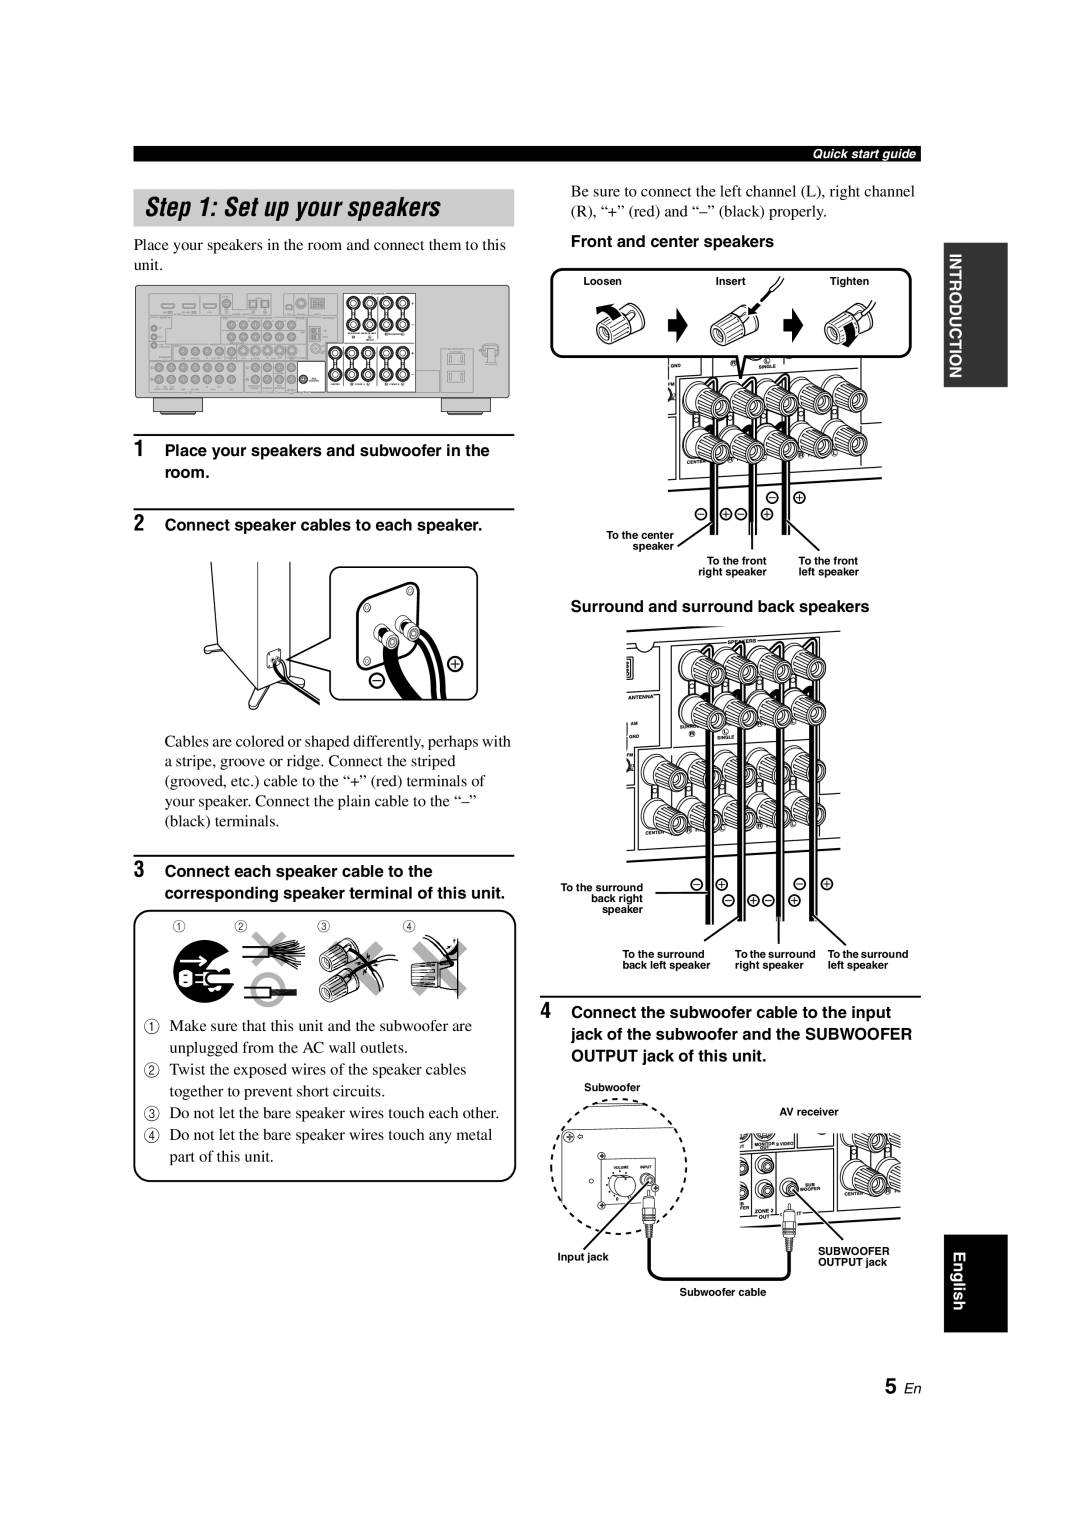 Yamaha HTR-6150 owner manual 5 En, Make sure that this unit and the subwoofer are, unplugged from the AC wall outlets 